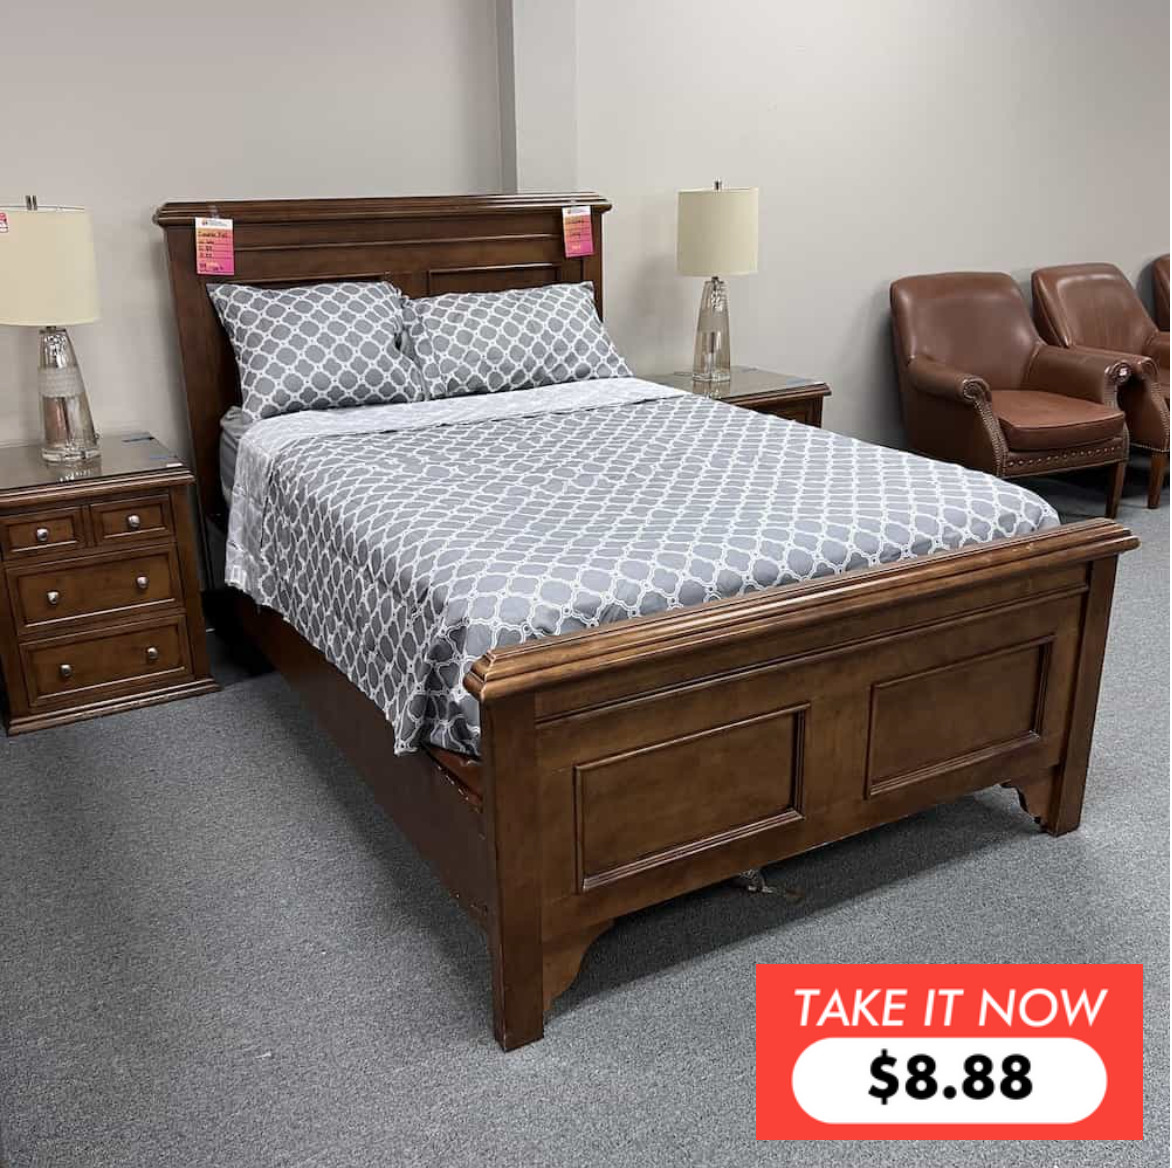 walnut bed frame, king or full, take it now price sticker reads: $8.88